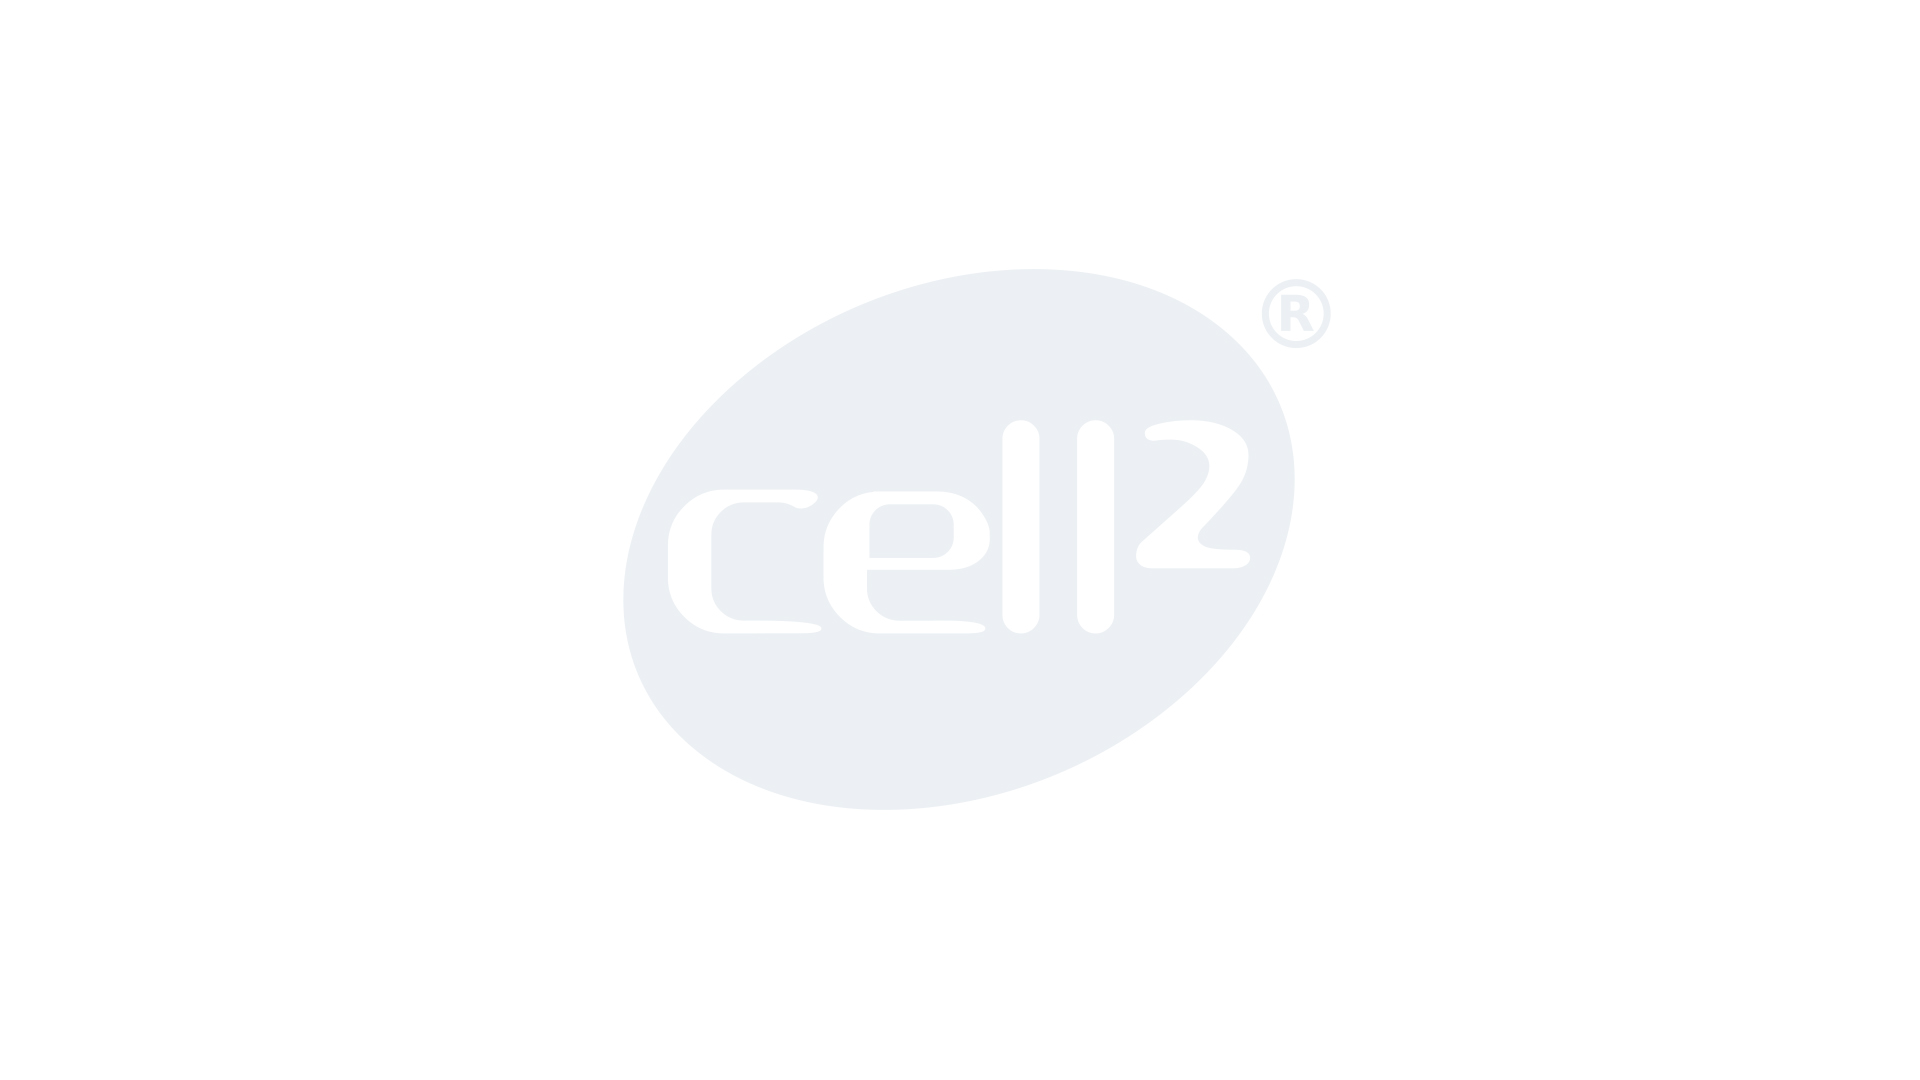 Visual & Audible Warning Systems - Cell2